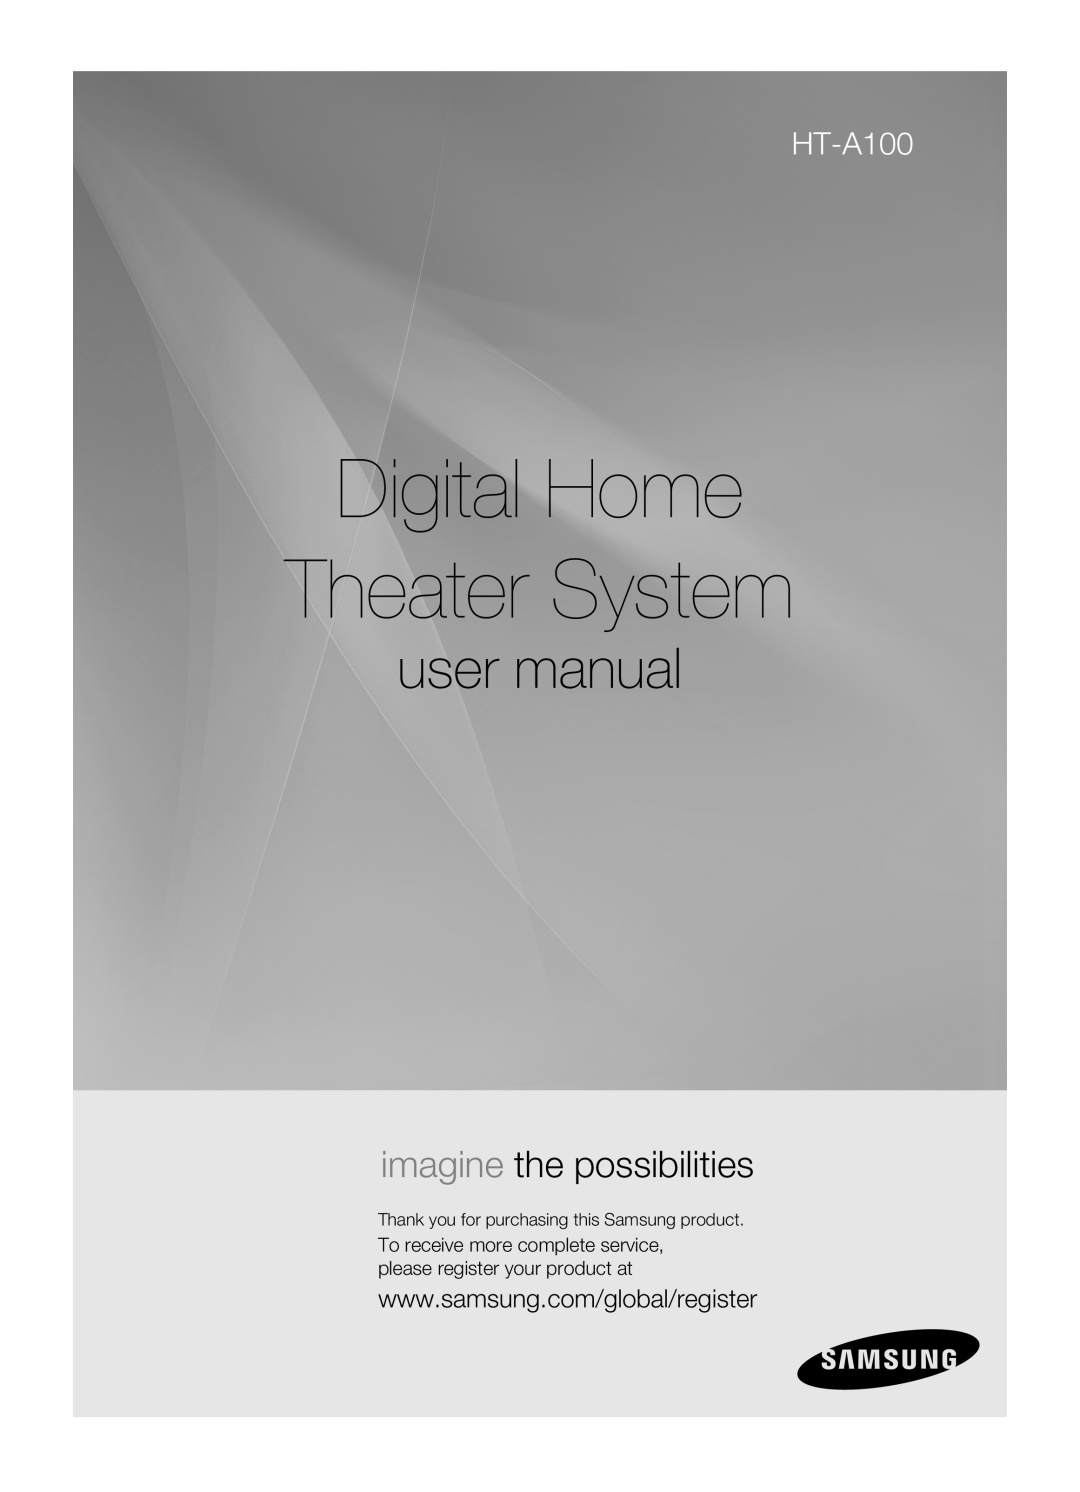 Samsung HT-A100 user manual Digital Home Theater System, imagine the possibilities 